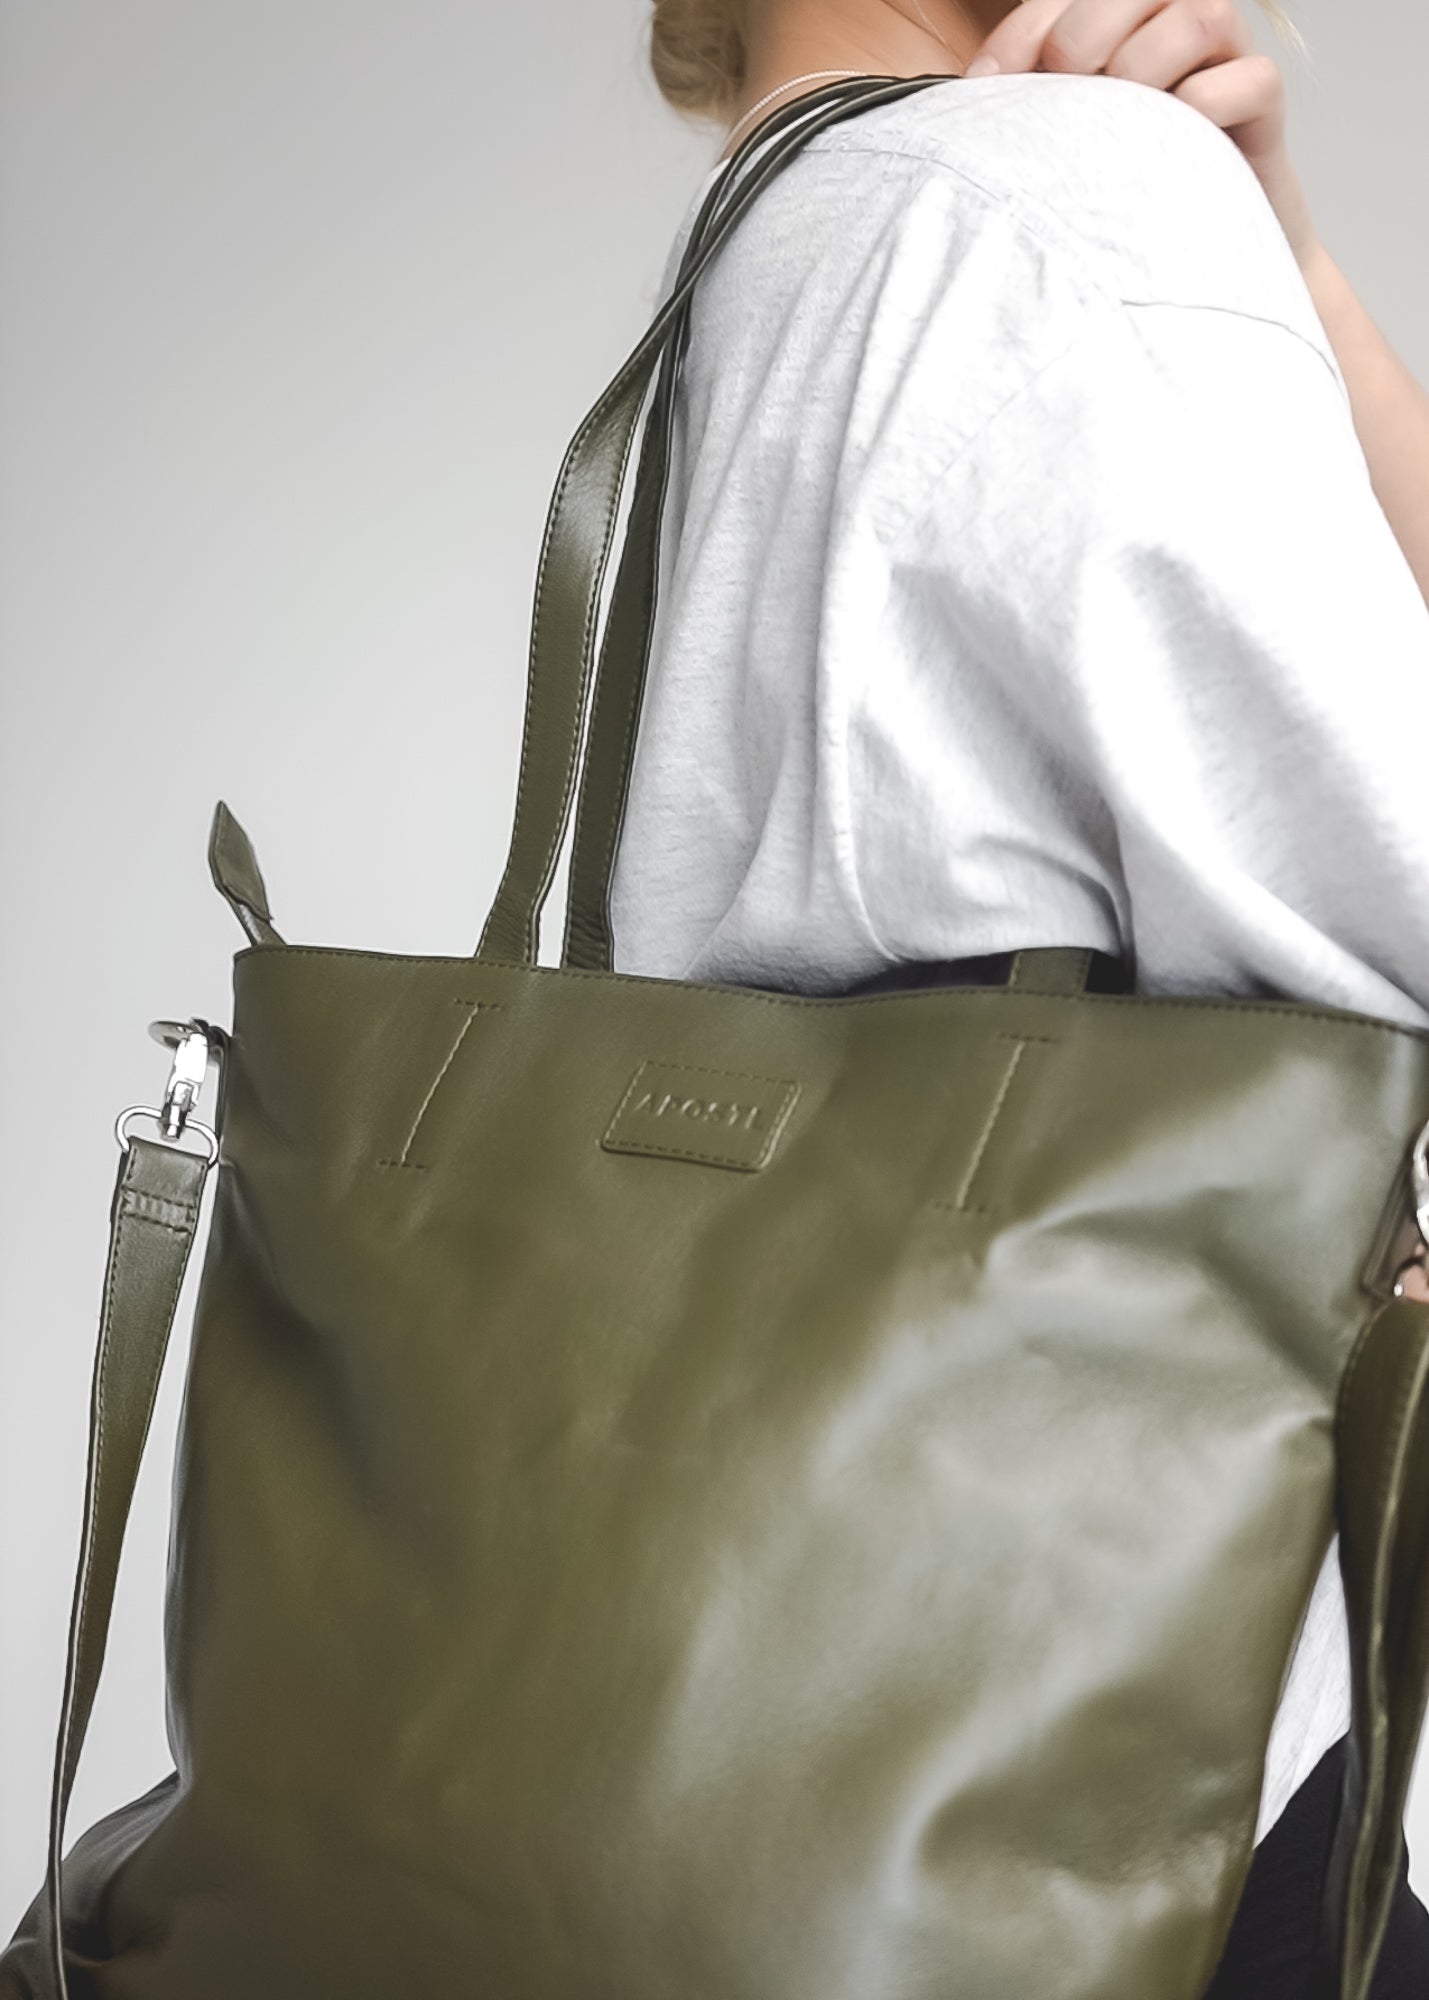 Apollos Tote - Olive Green - Olive Green